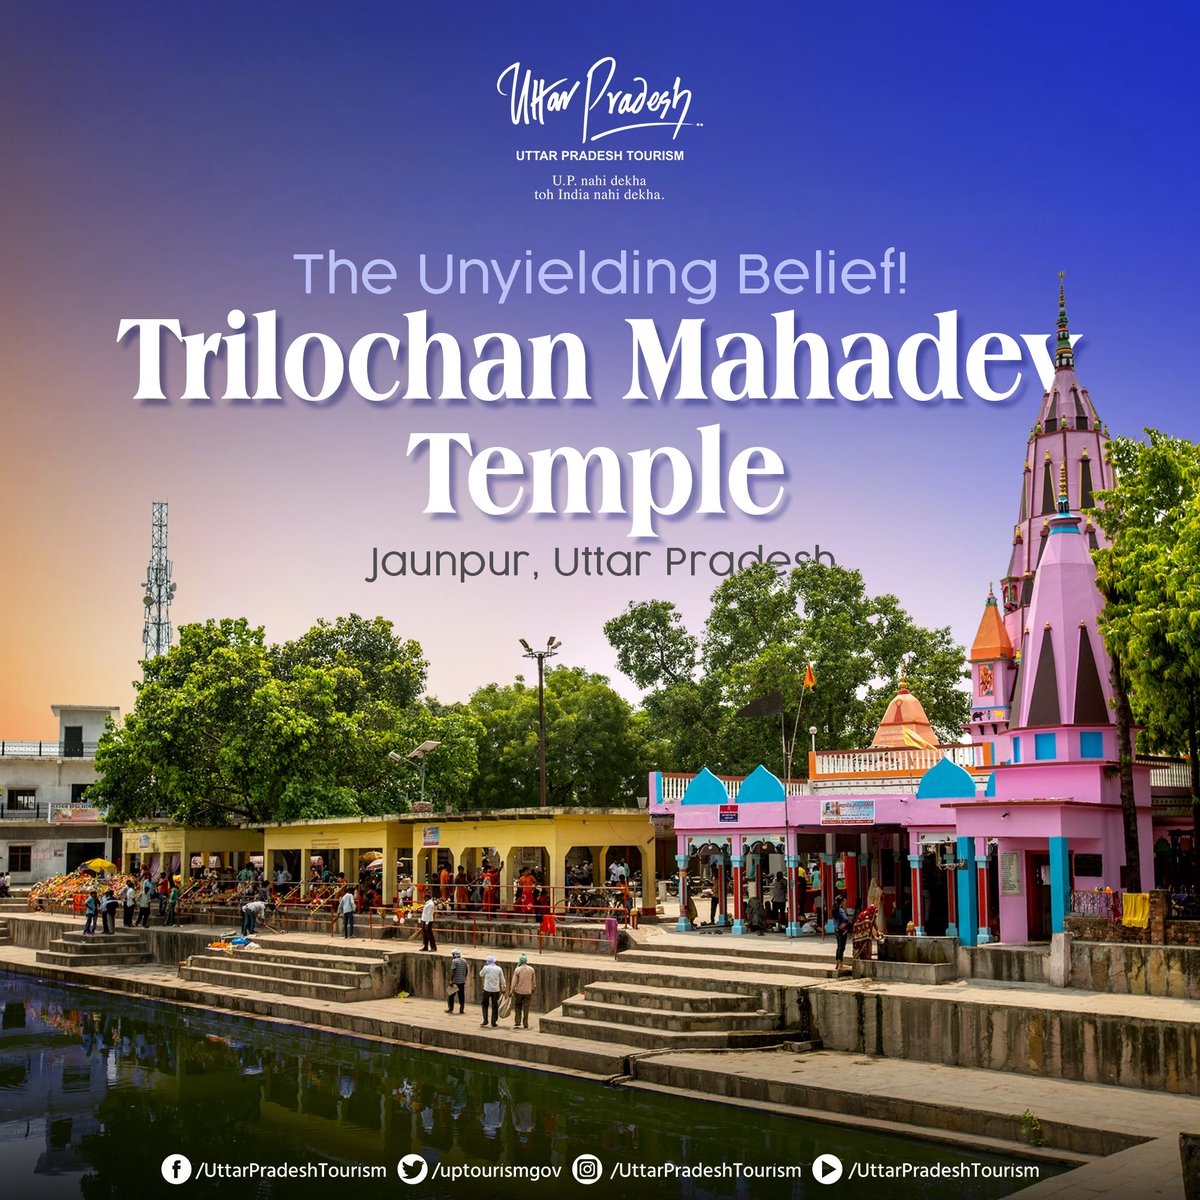 Got a wish? Whisper it at #TrilochanMahadevTemple, where pure hearts see miracles! Devotees flock from all corners, drawn by the holy legends of #LordBrahma's yagya and #LordShiva's divine appearance. 🙏 #Jaunpur #SpiritualTourism #Devotion #Dharmarth #UPTourism #UttarPradesh